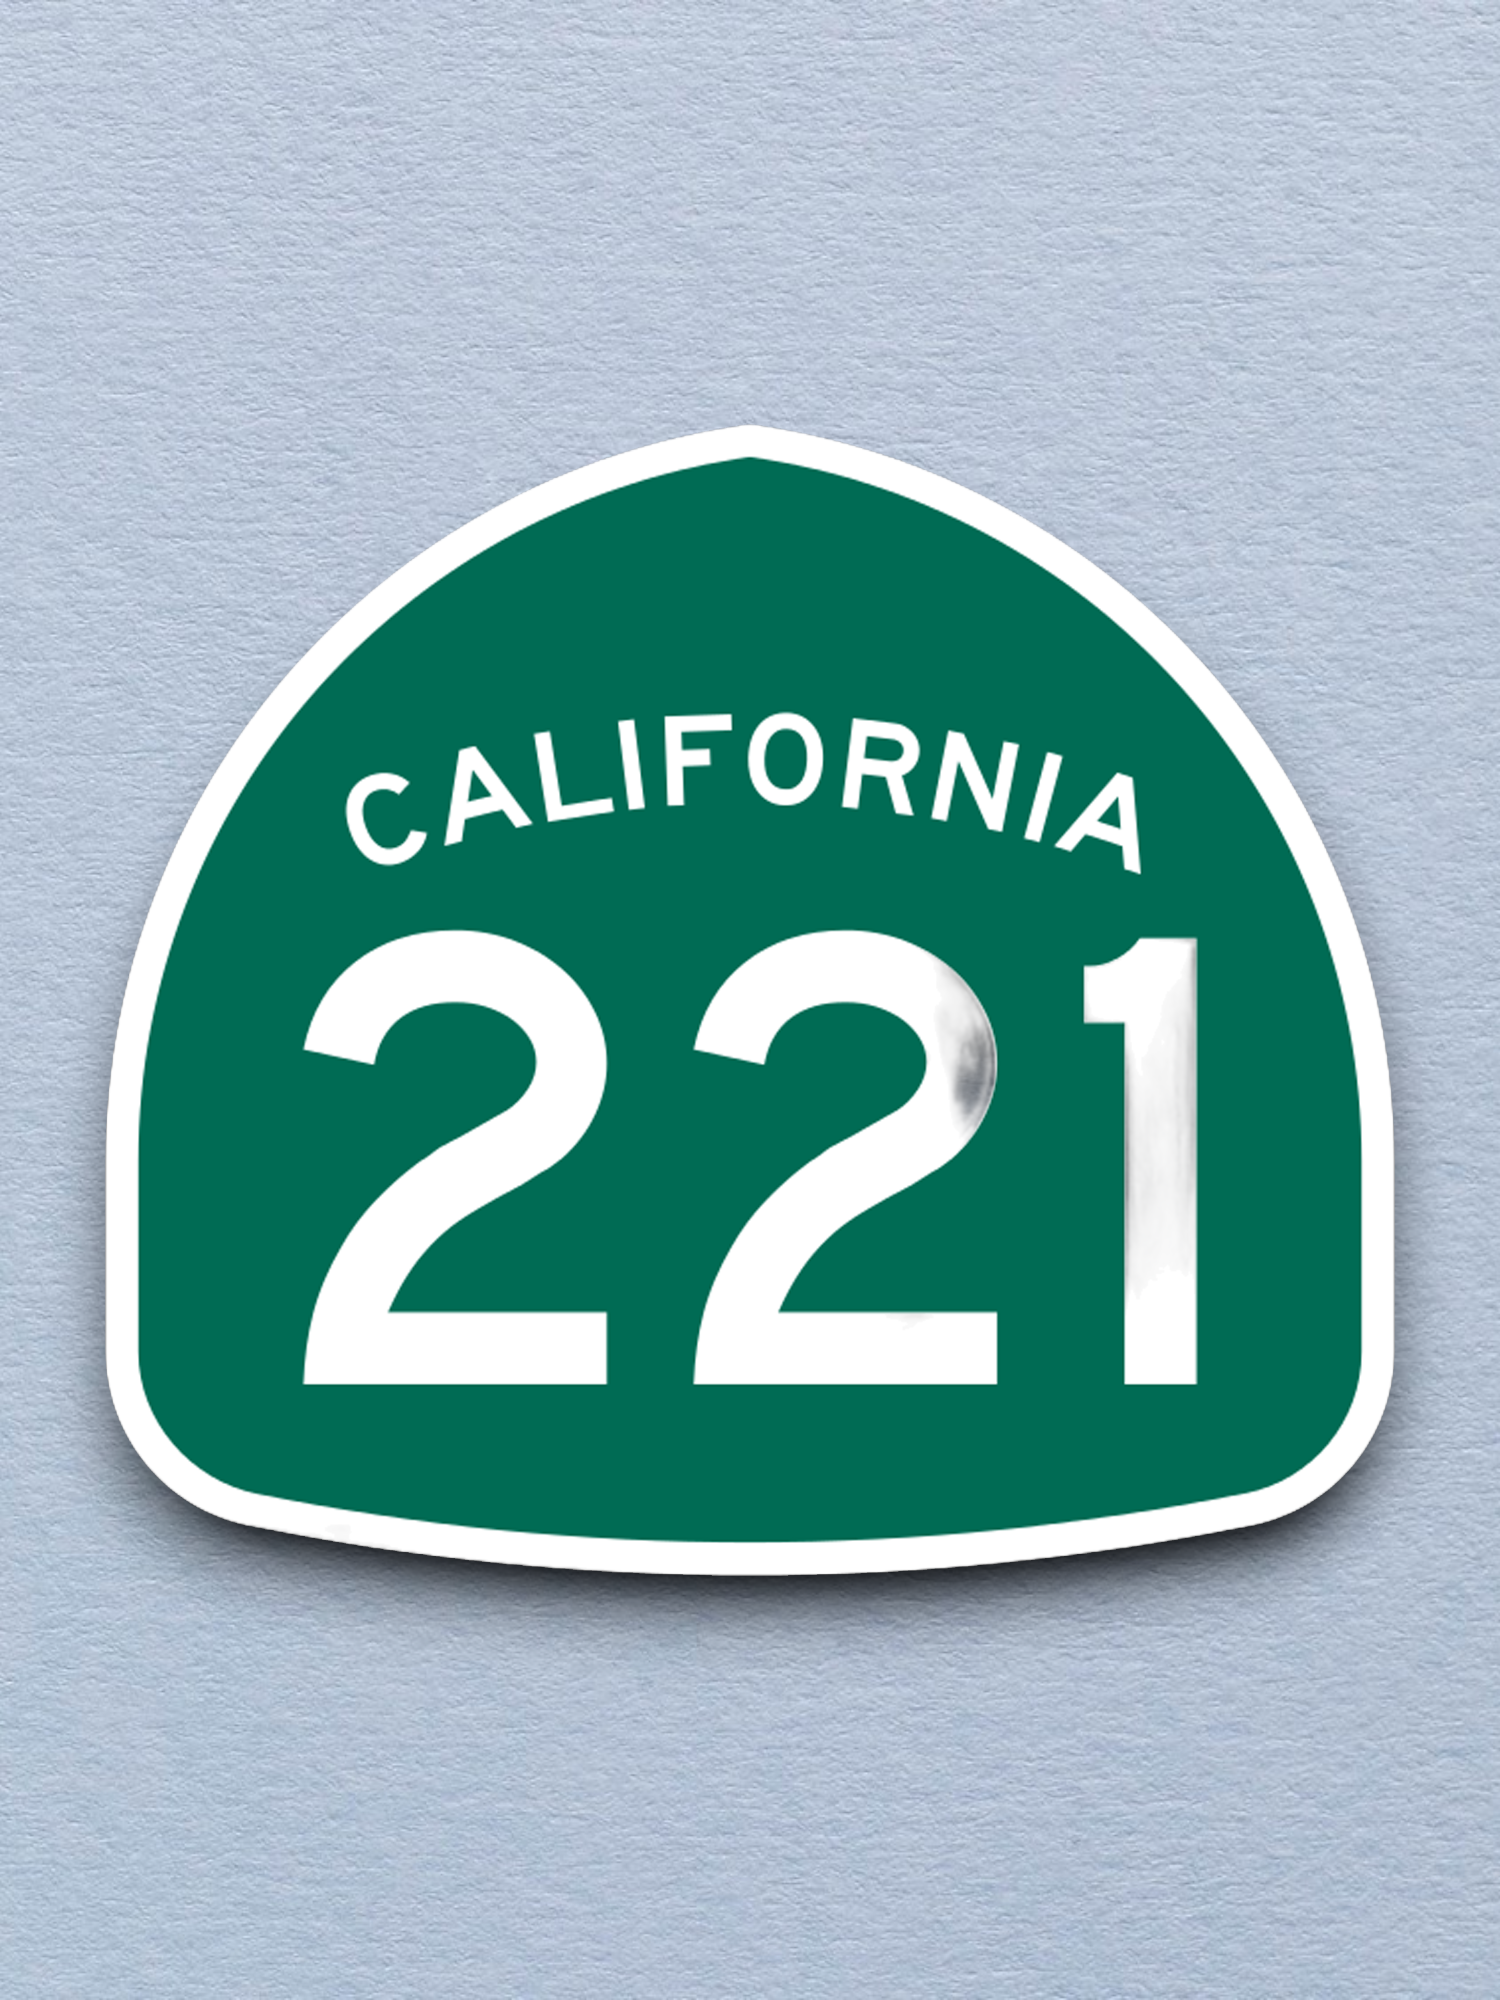 California State Route 221 Road Sign Sticker